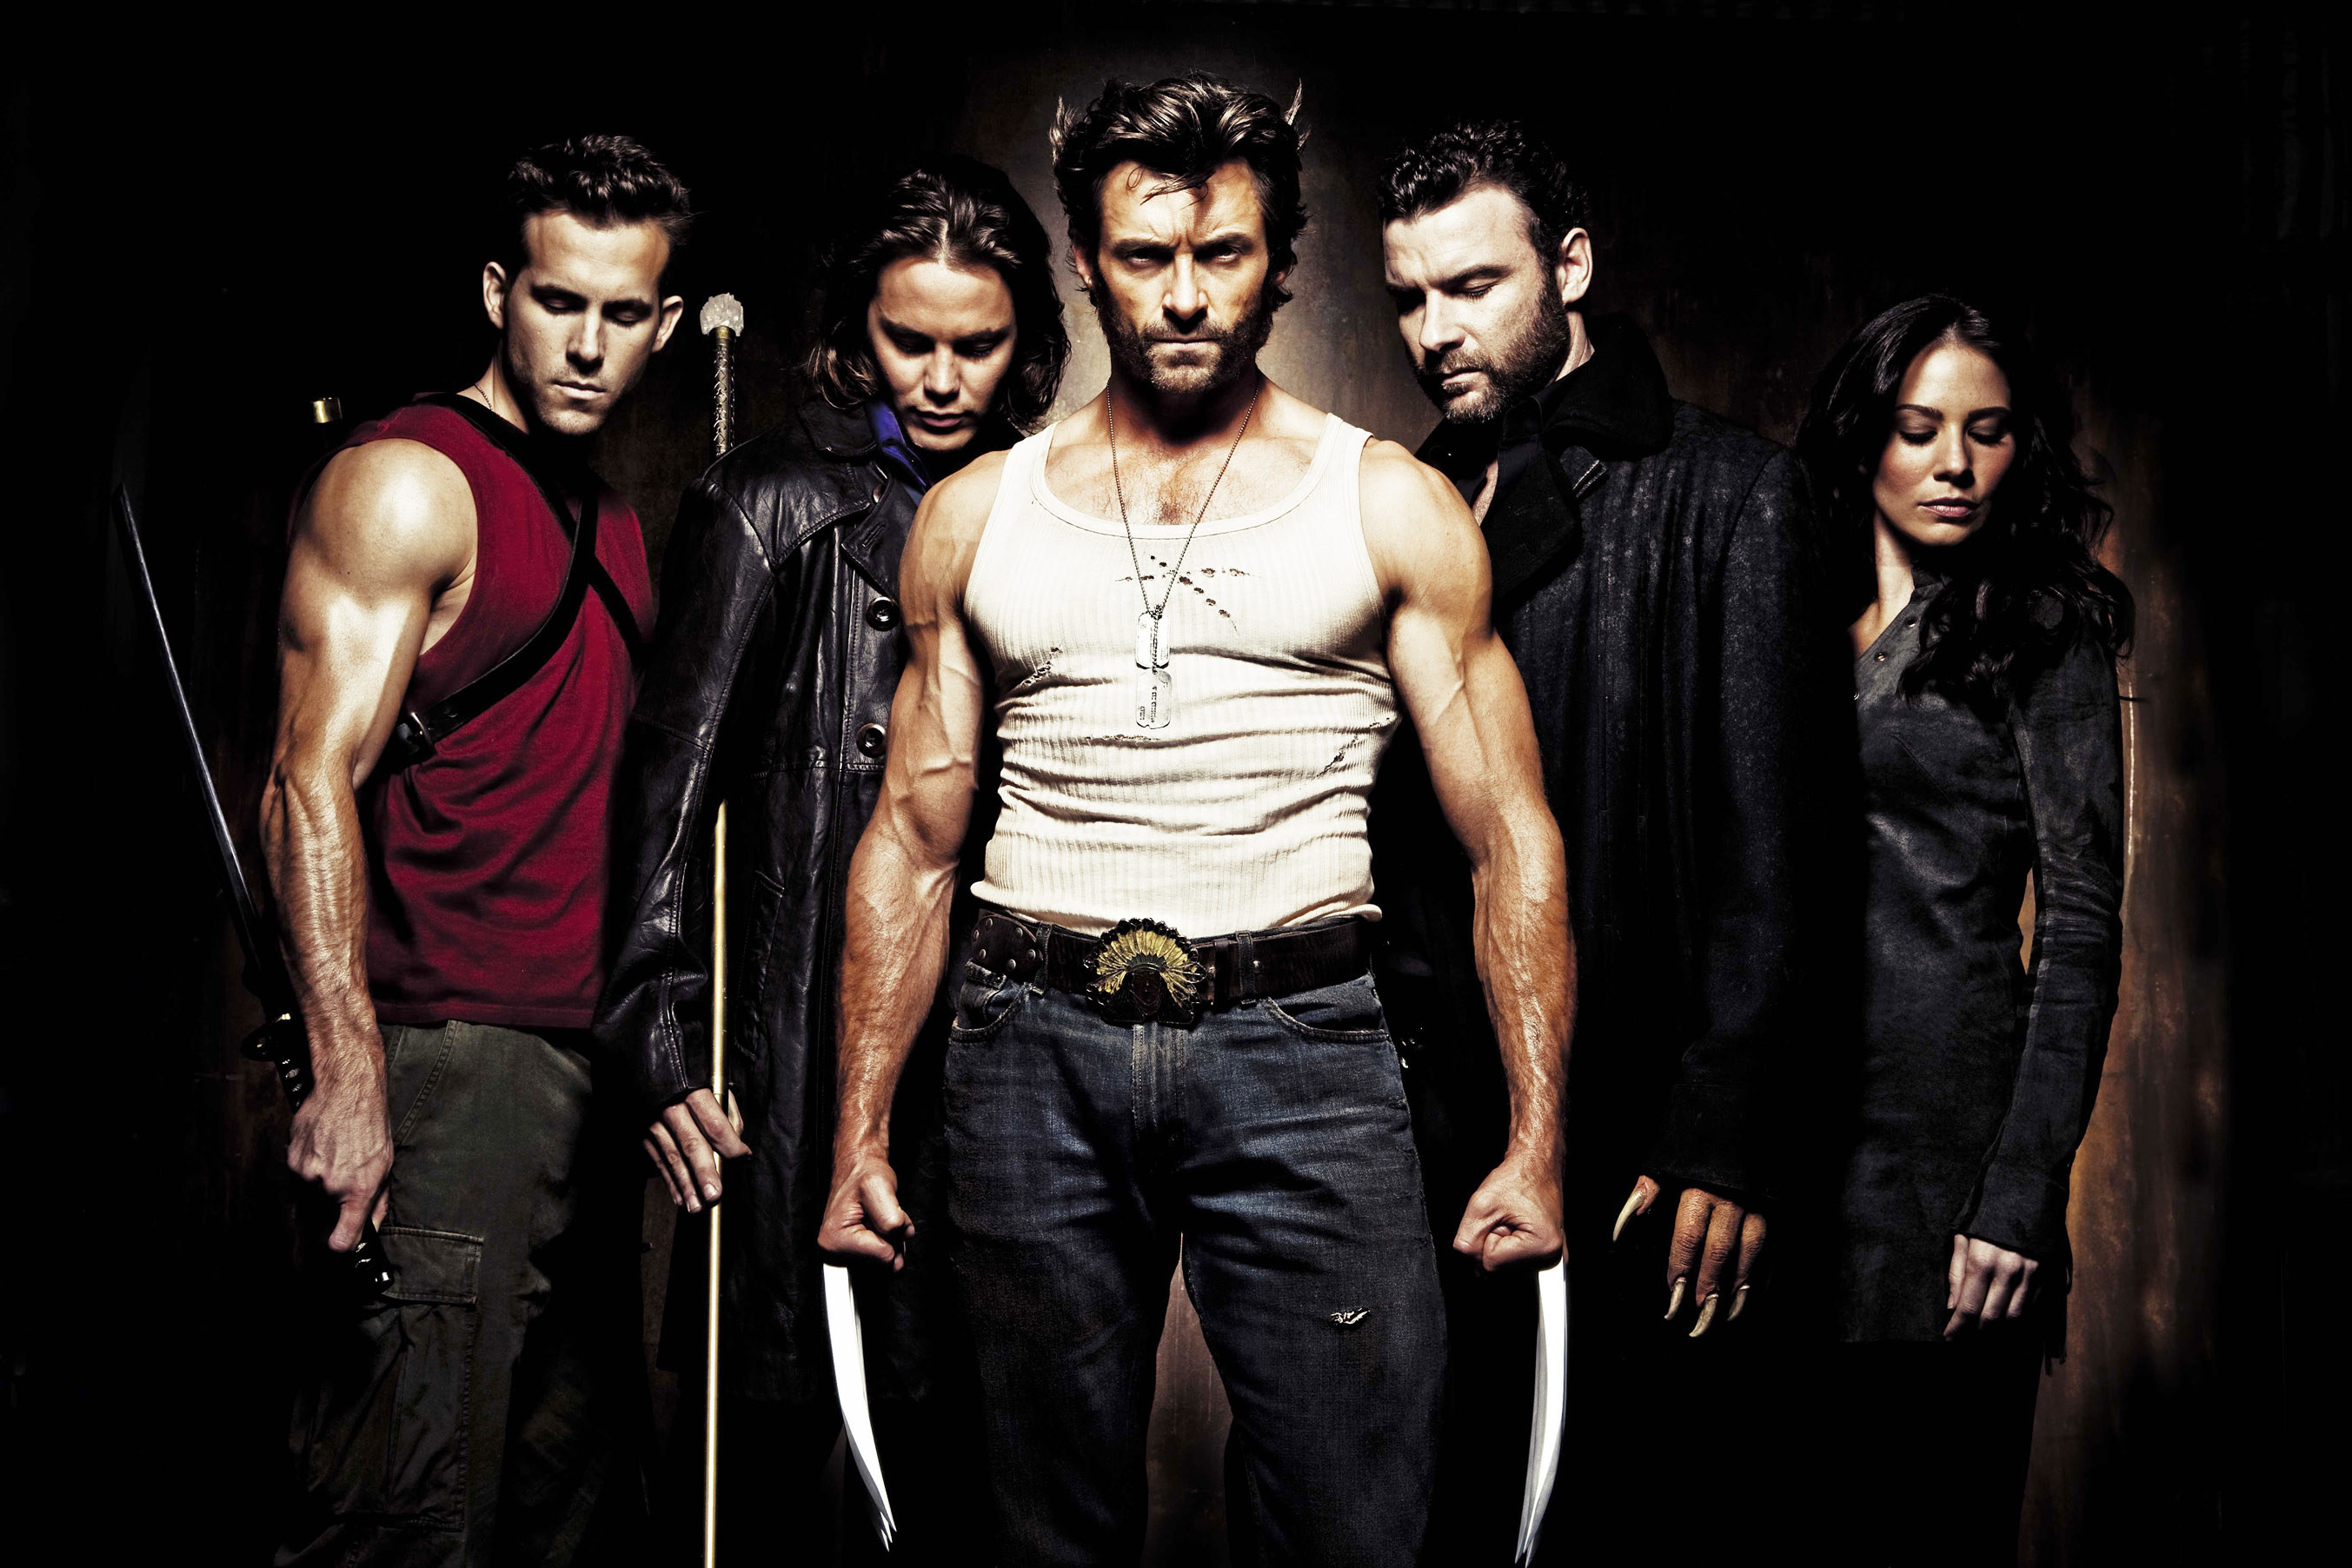 Wolverine stands in the middle of a group of his costars